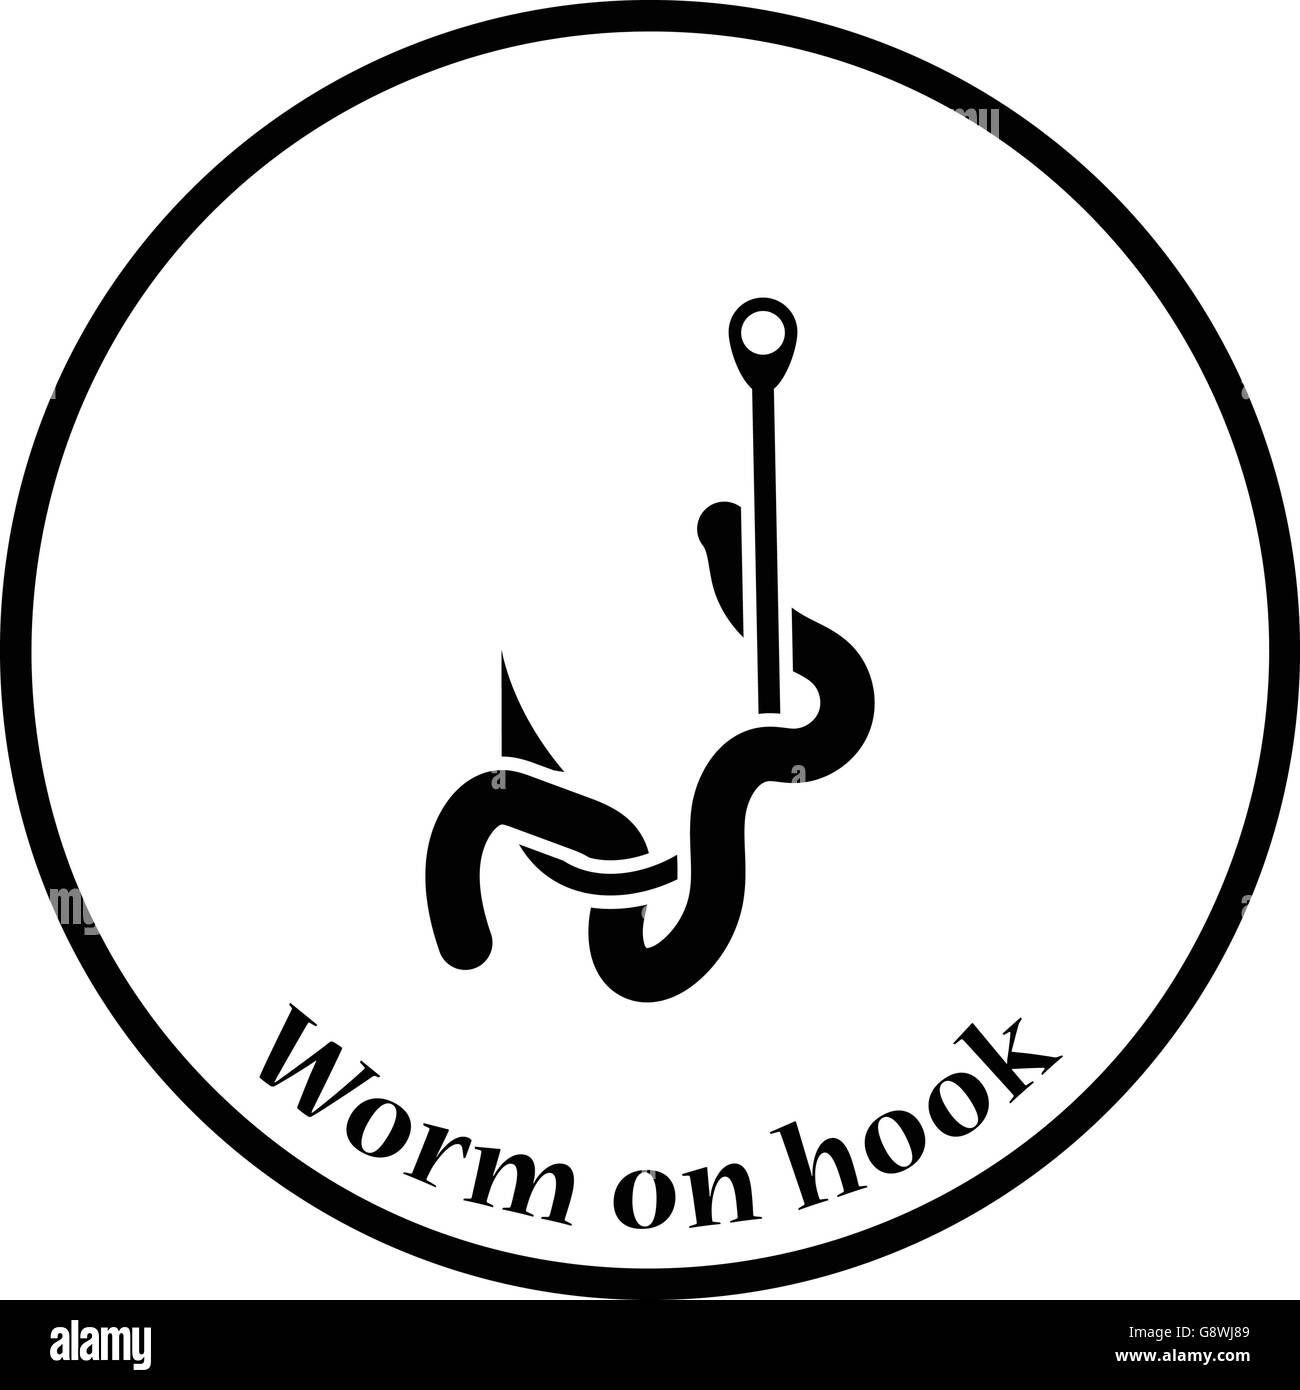 Icon of worm on hook. Thin circle design. Vector illustration. Stock Vector